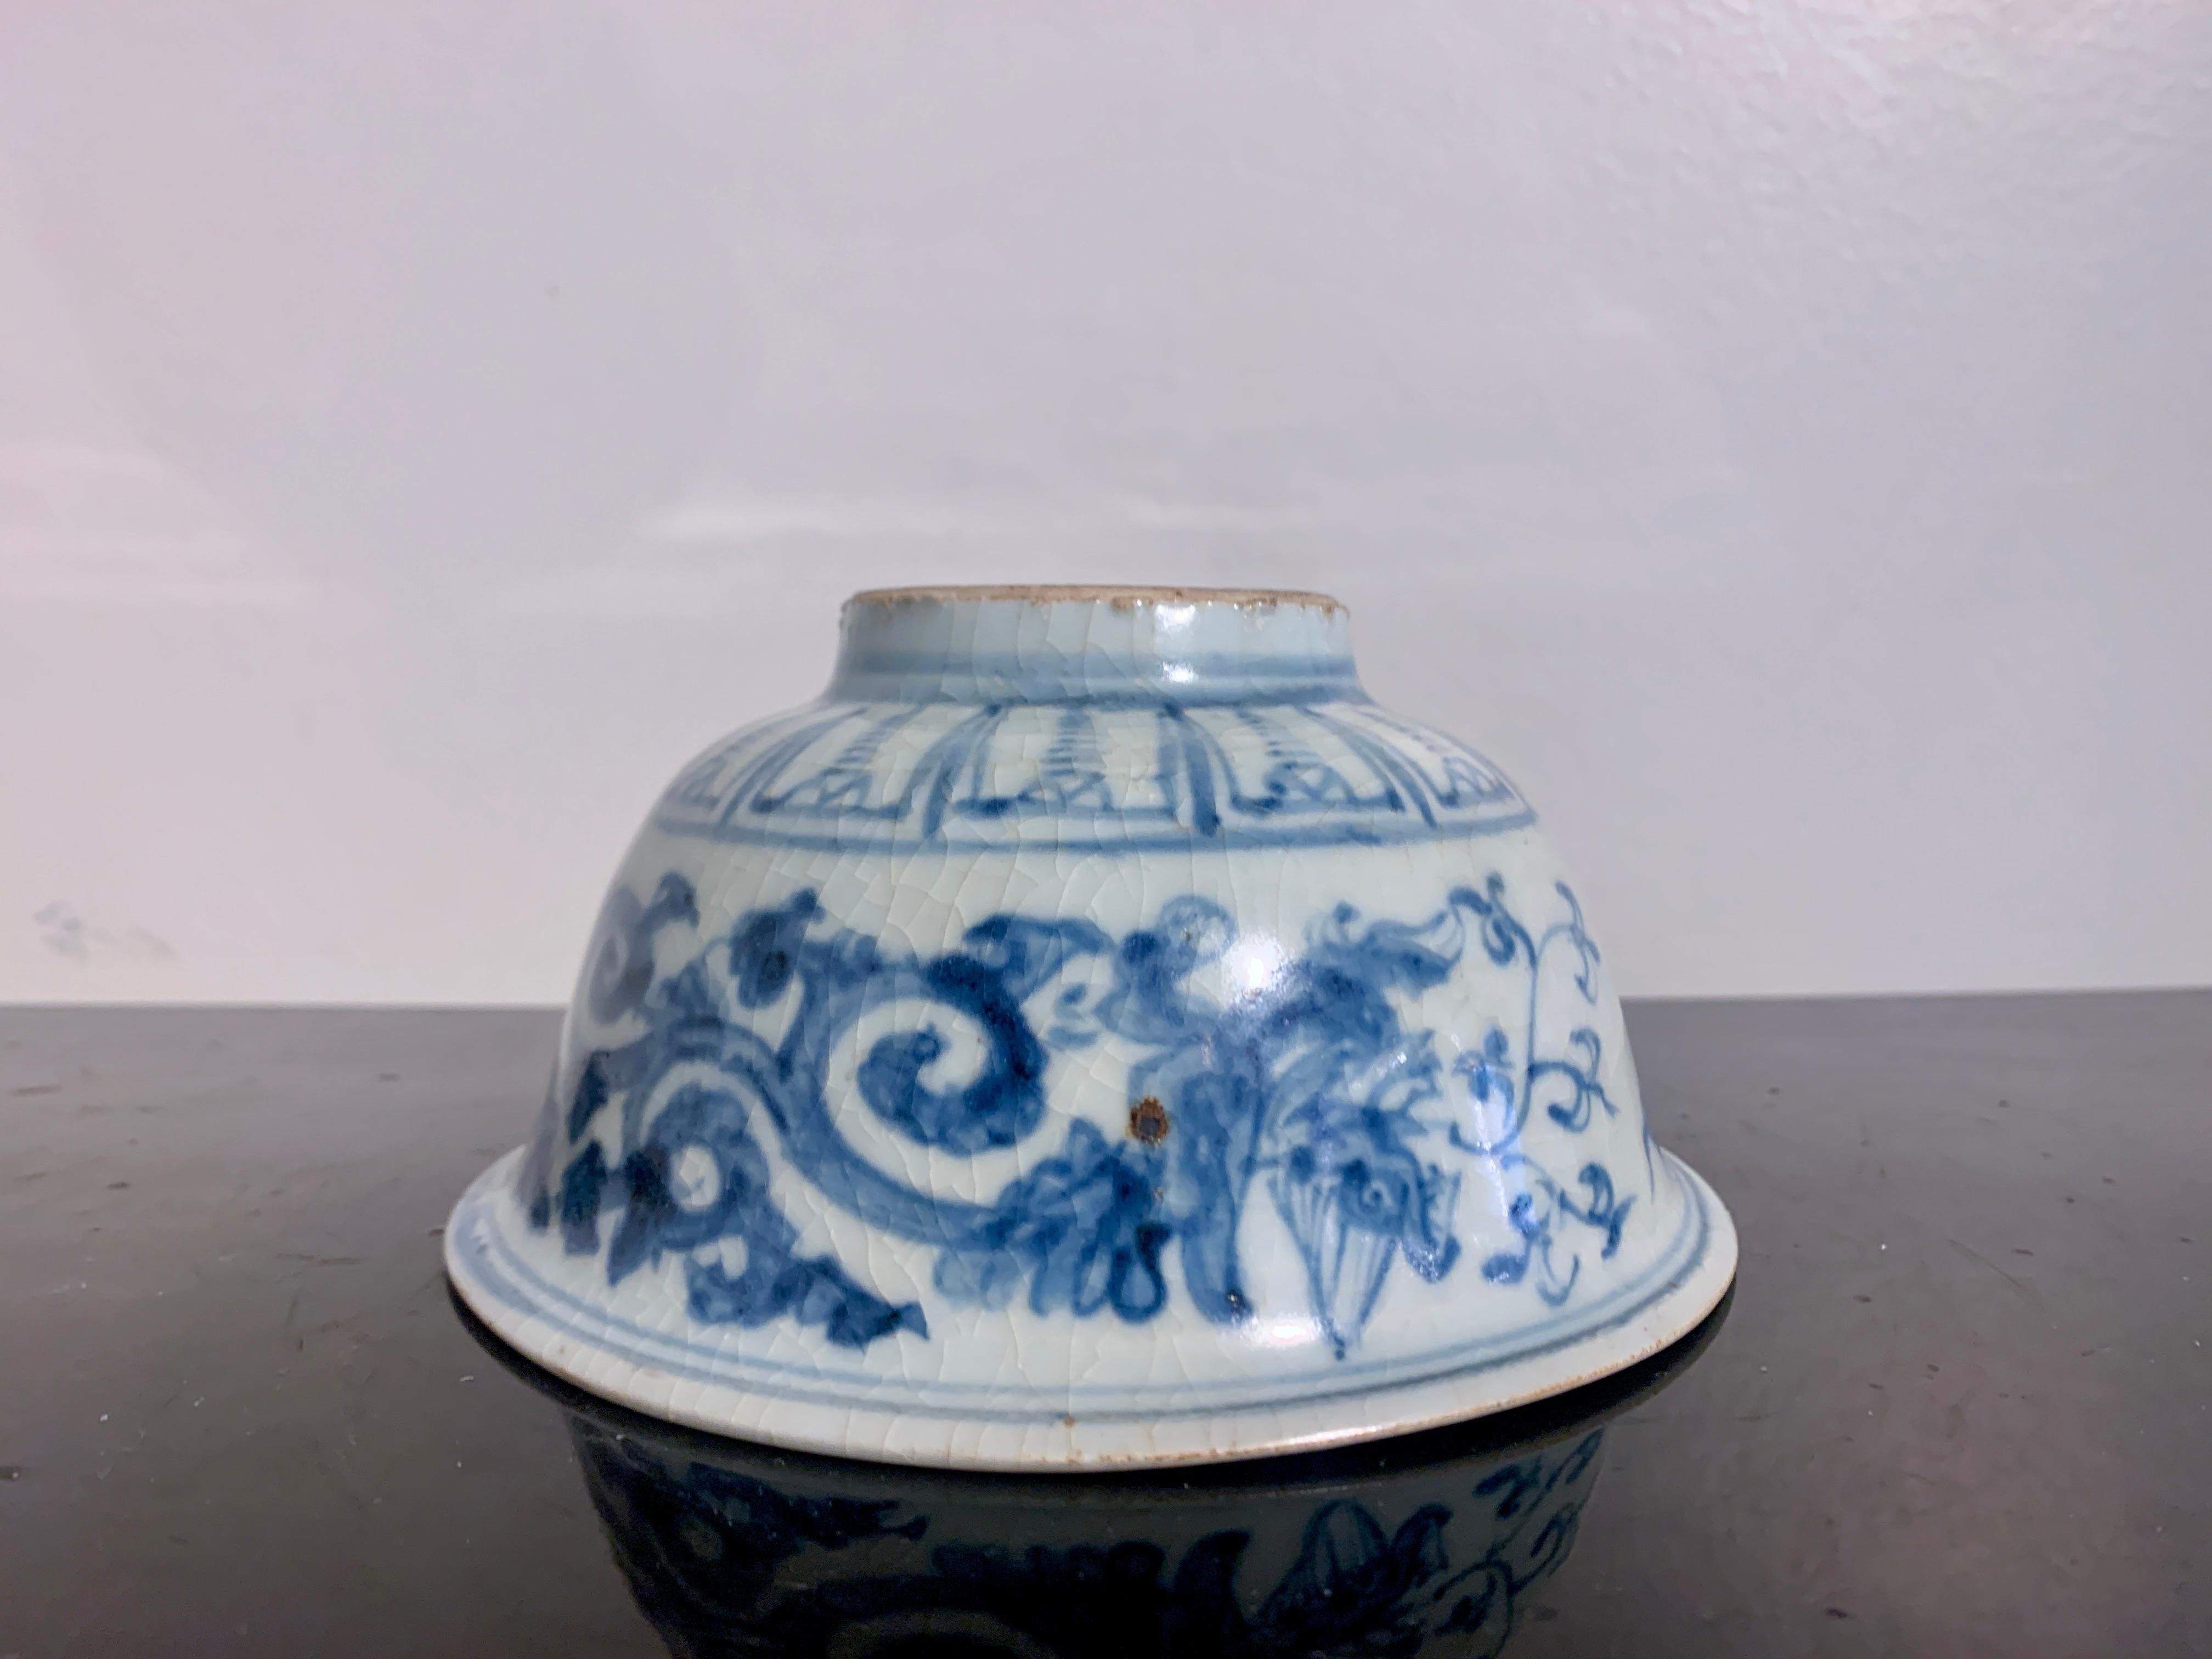 Porcelain Ming Dynasty Blue and White Bowl for the Tibetan Market, 15th/16th c, China